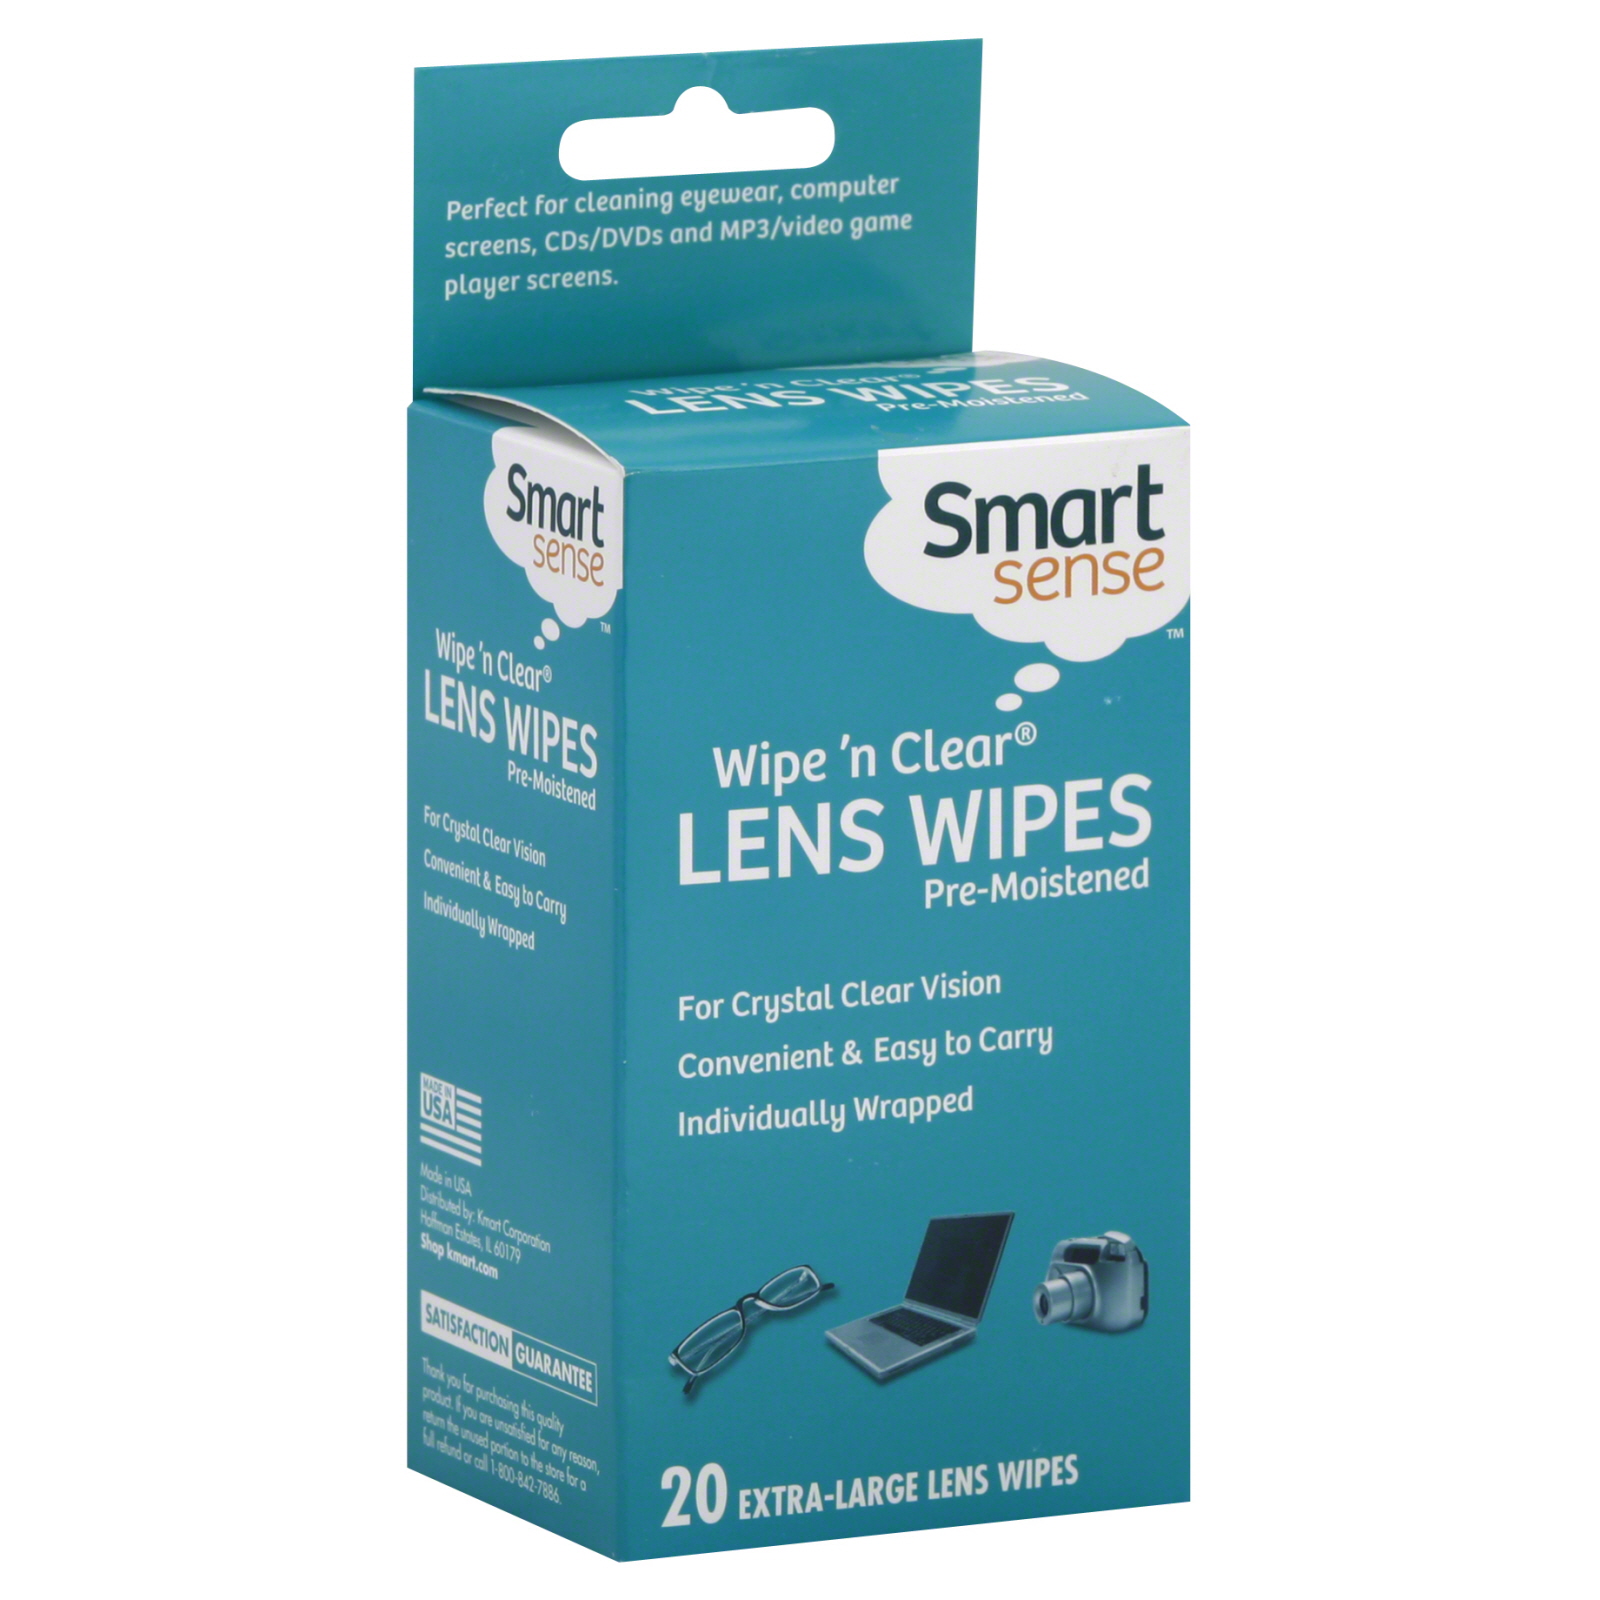 Smart Sense Lens Wipes, Wipe 'n Clear, Pre-Moistened, Extra-Large 20 wipes